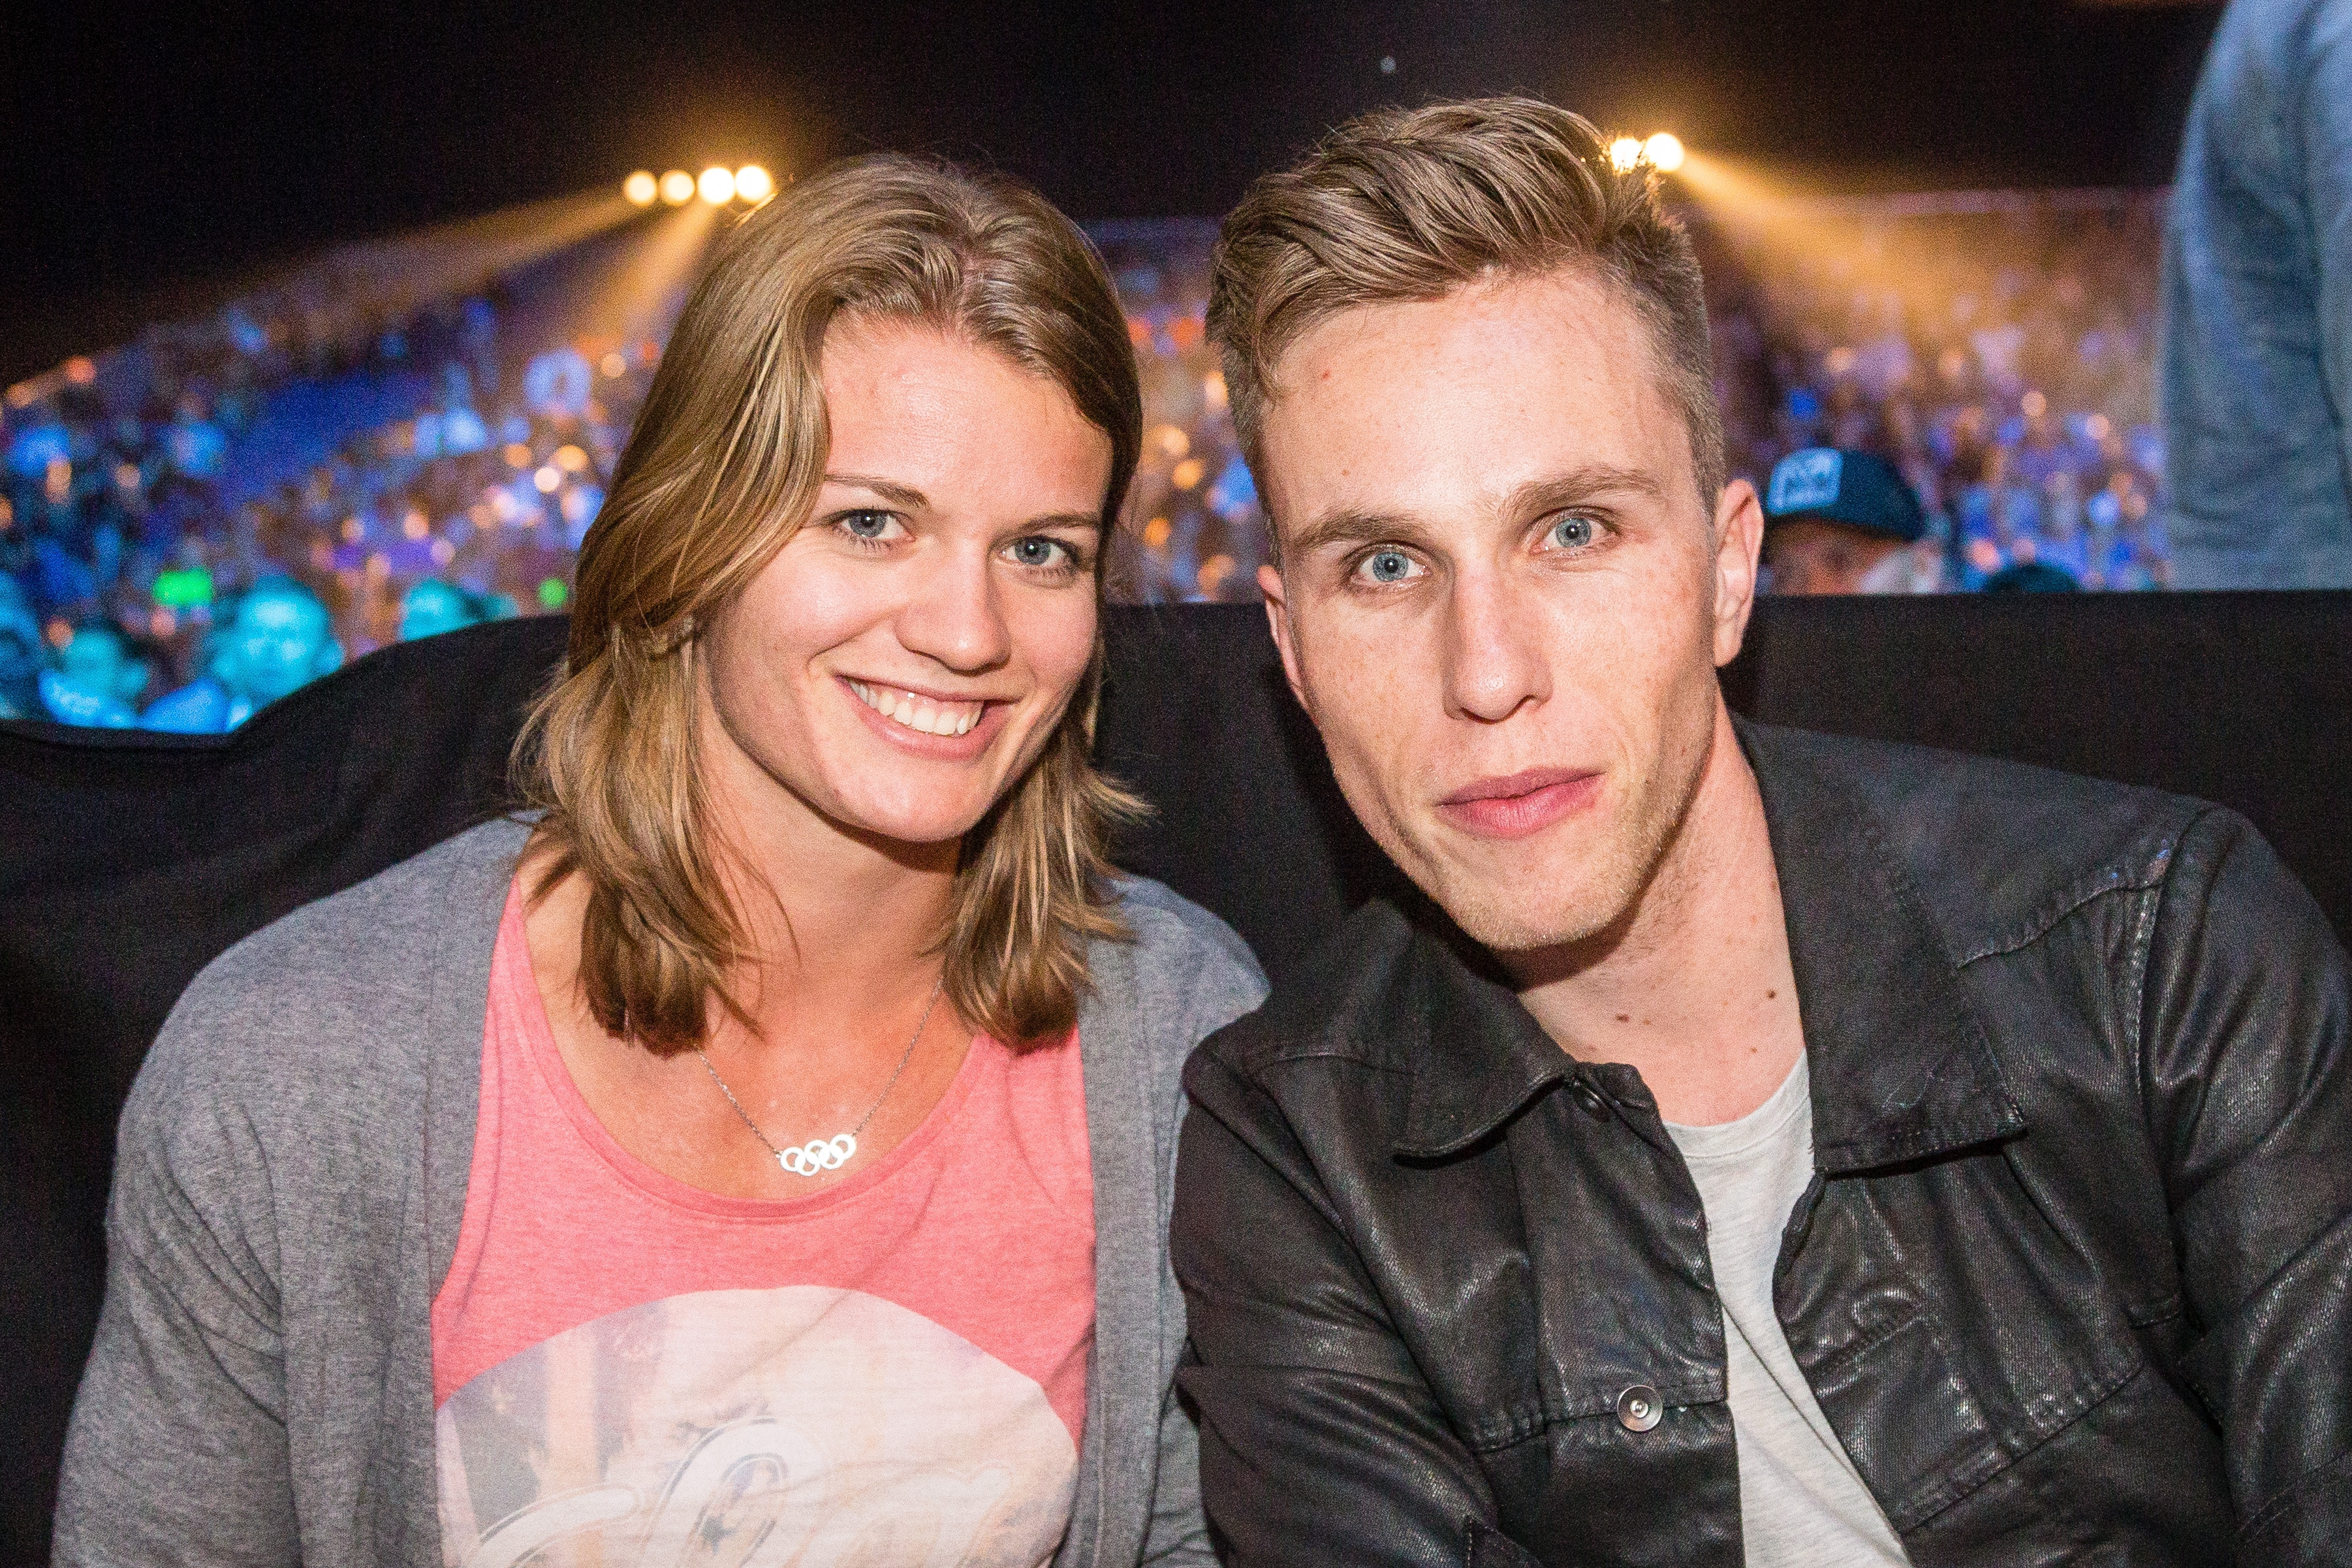 Nicky Romero Wallpaper Image Photos Pictures